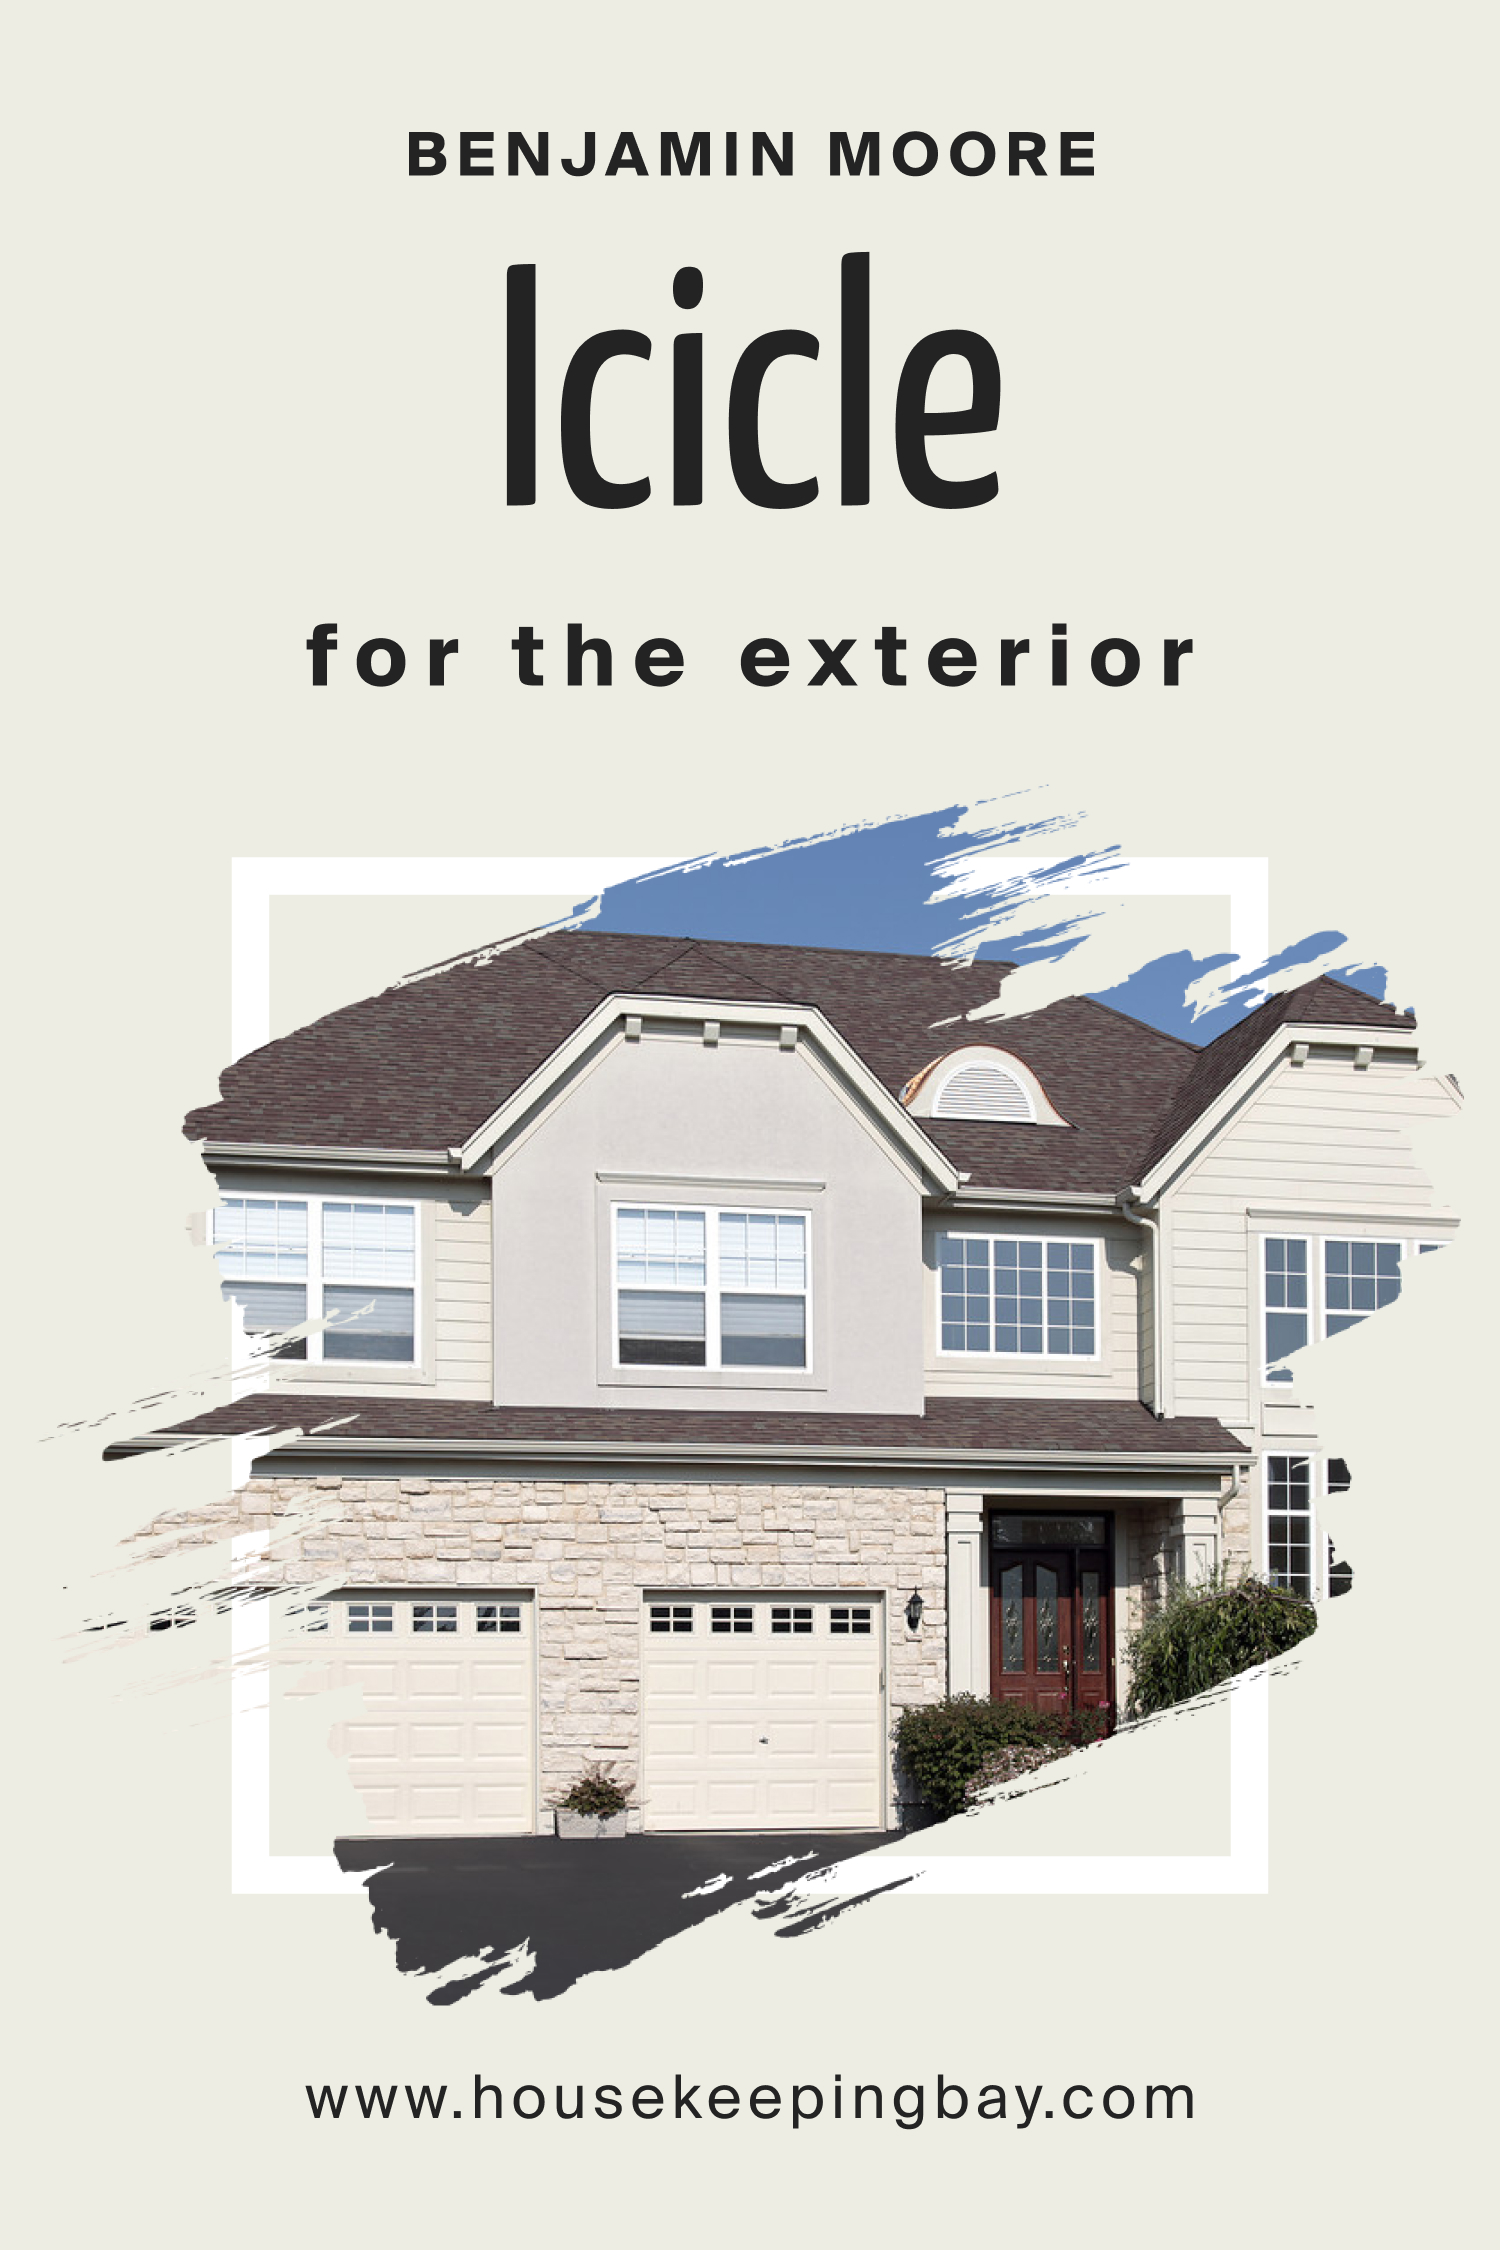 Icicle 2142 70 for the Exterior Use